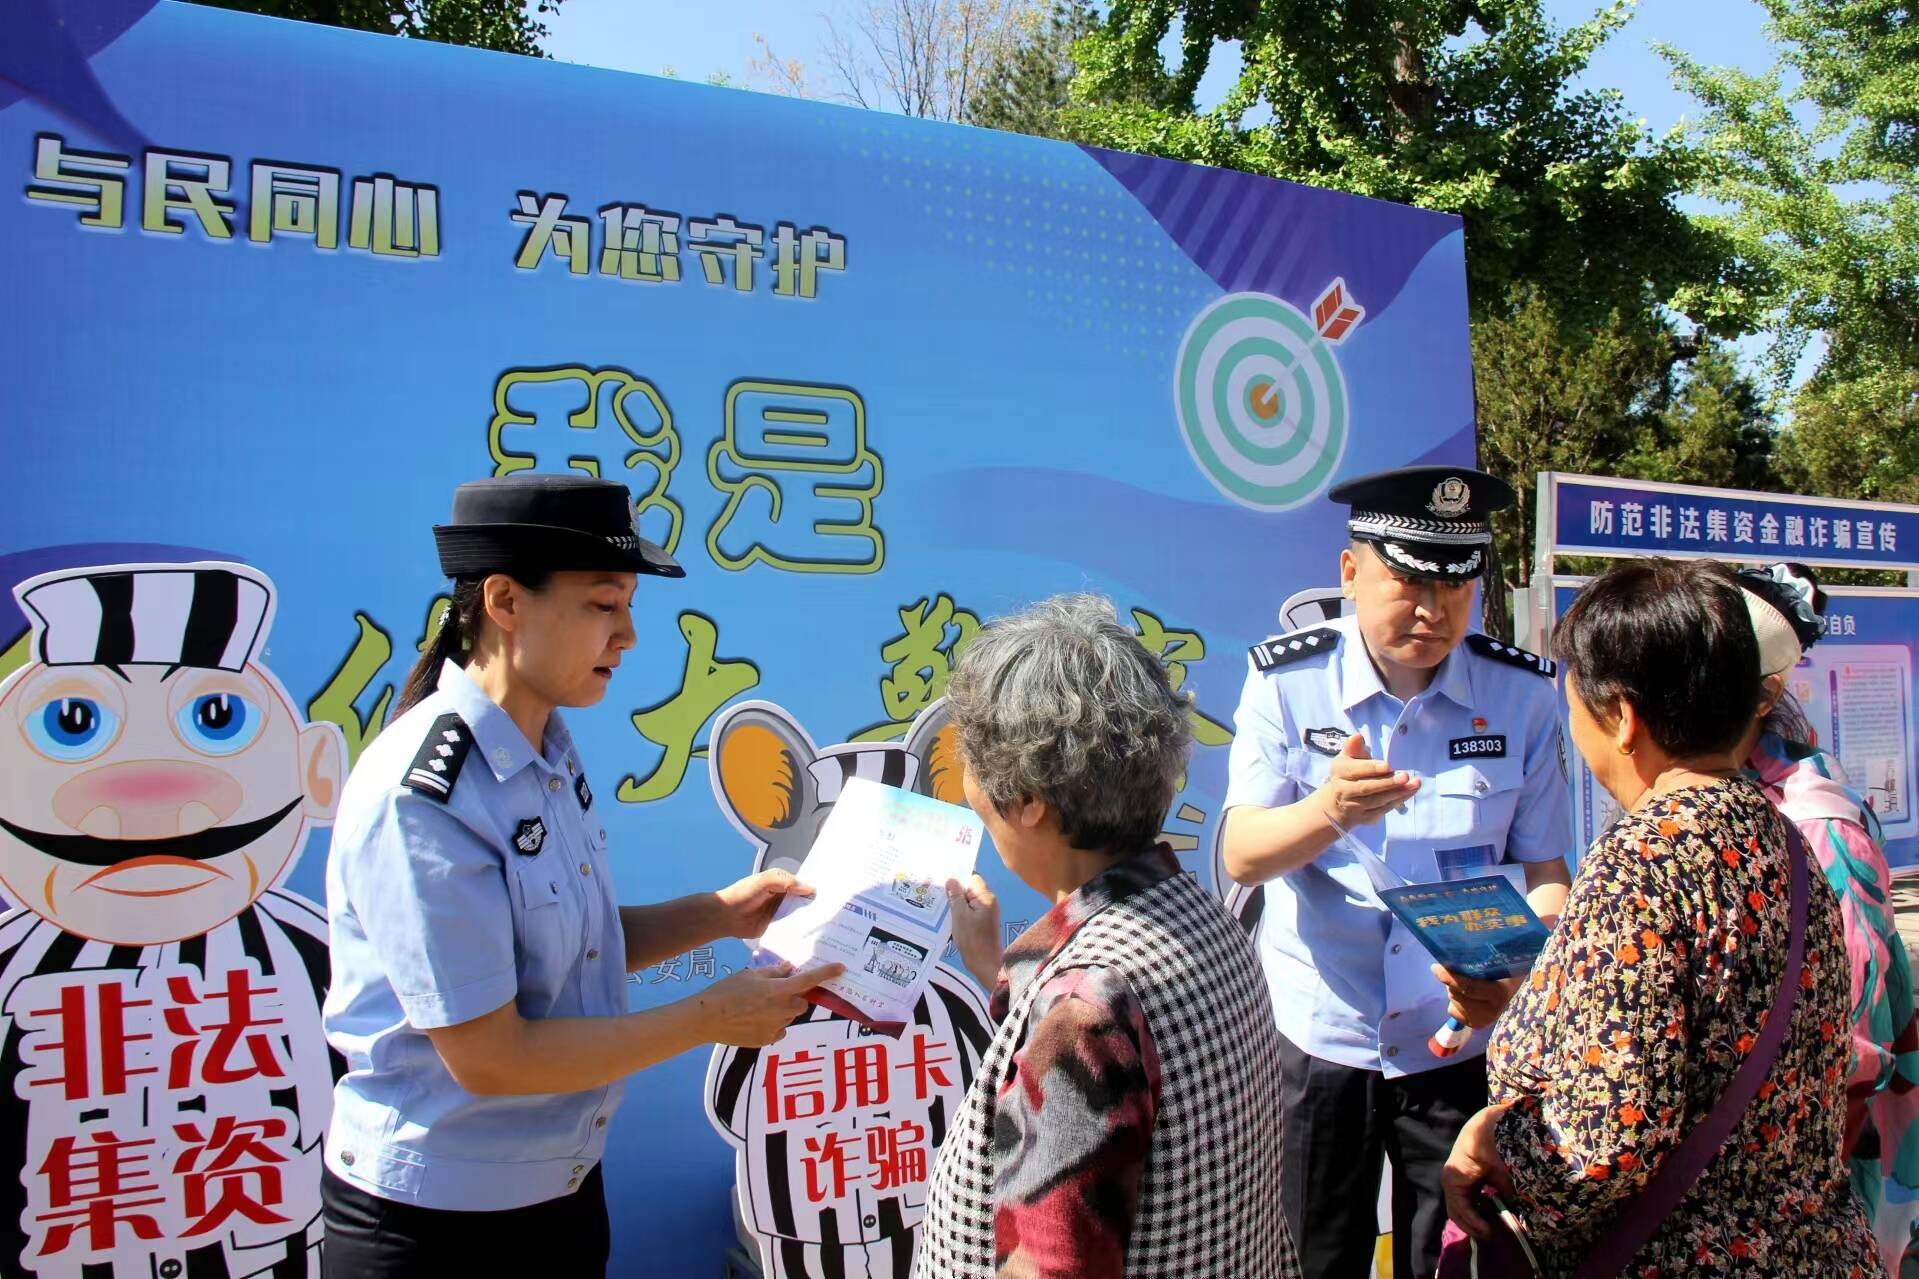  Jinan Public Security Carries out Publicity Activities on Preventing Economic Crimes